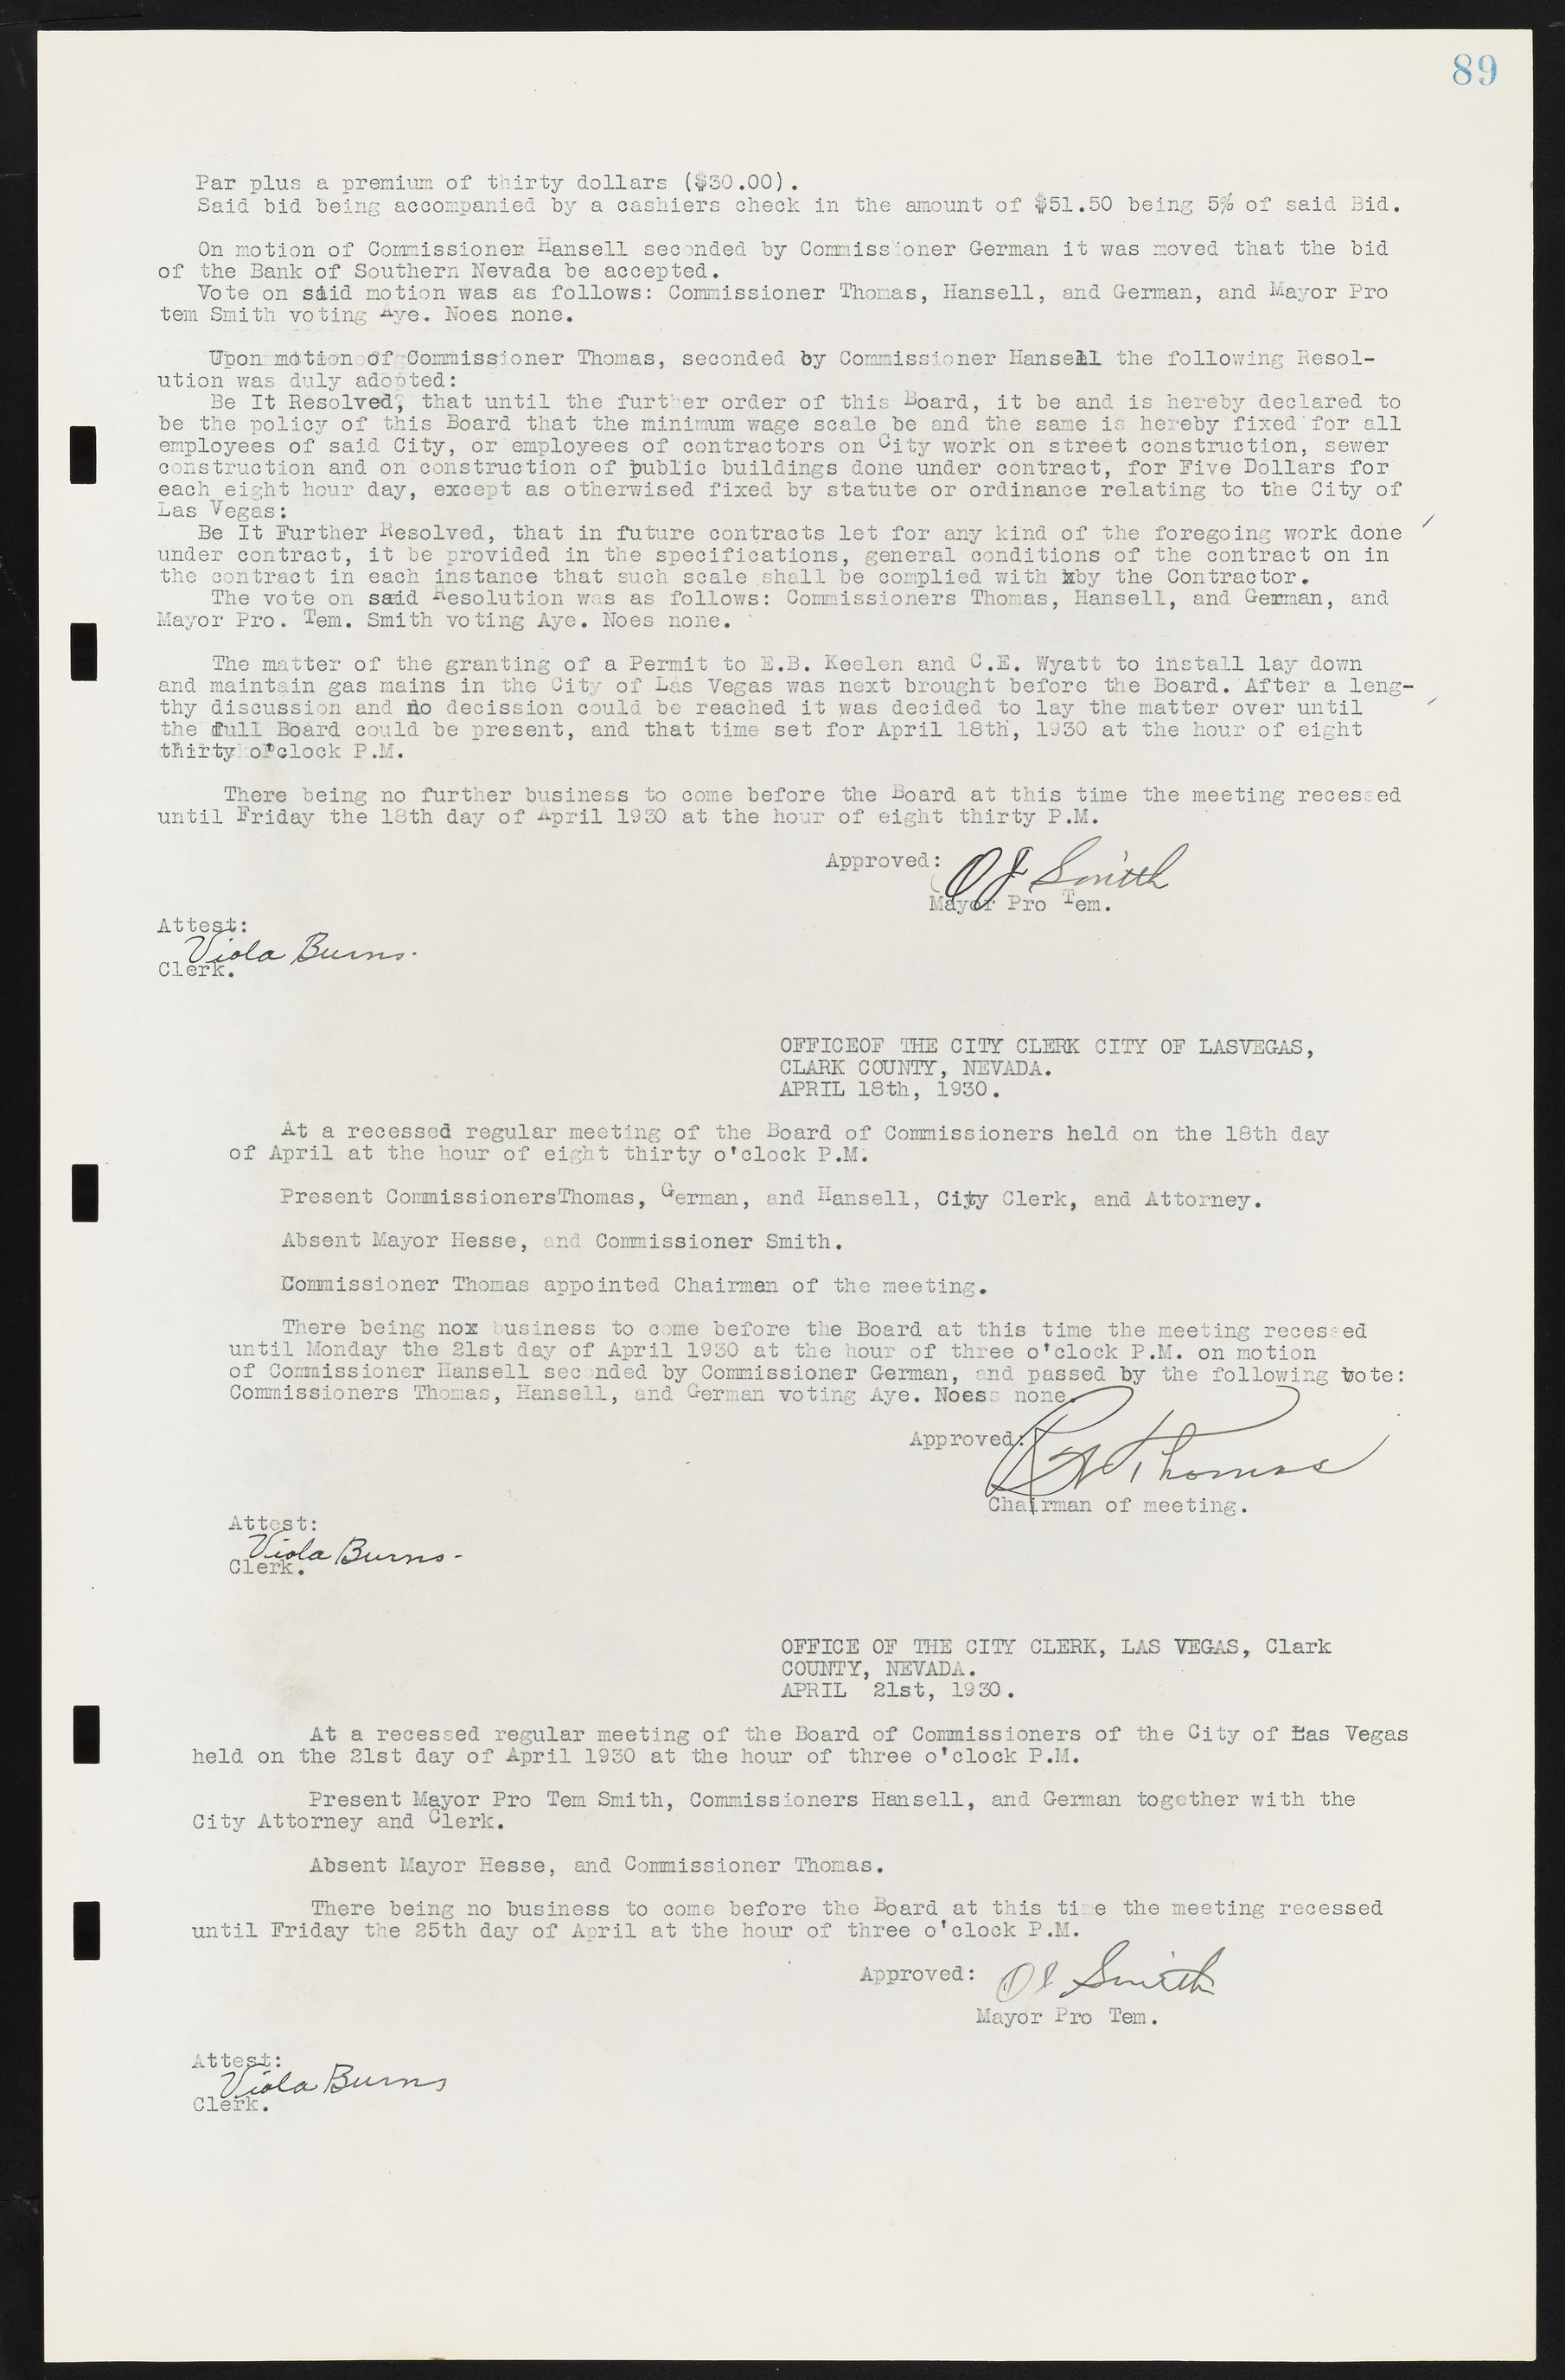 Las Vegas City Commission Minutes, May 14, 1929 to February 11, 1937, lvc000003-95